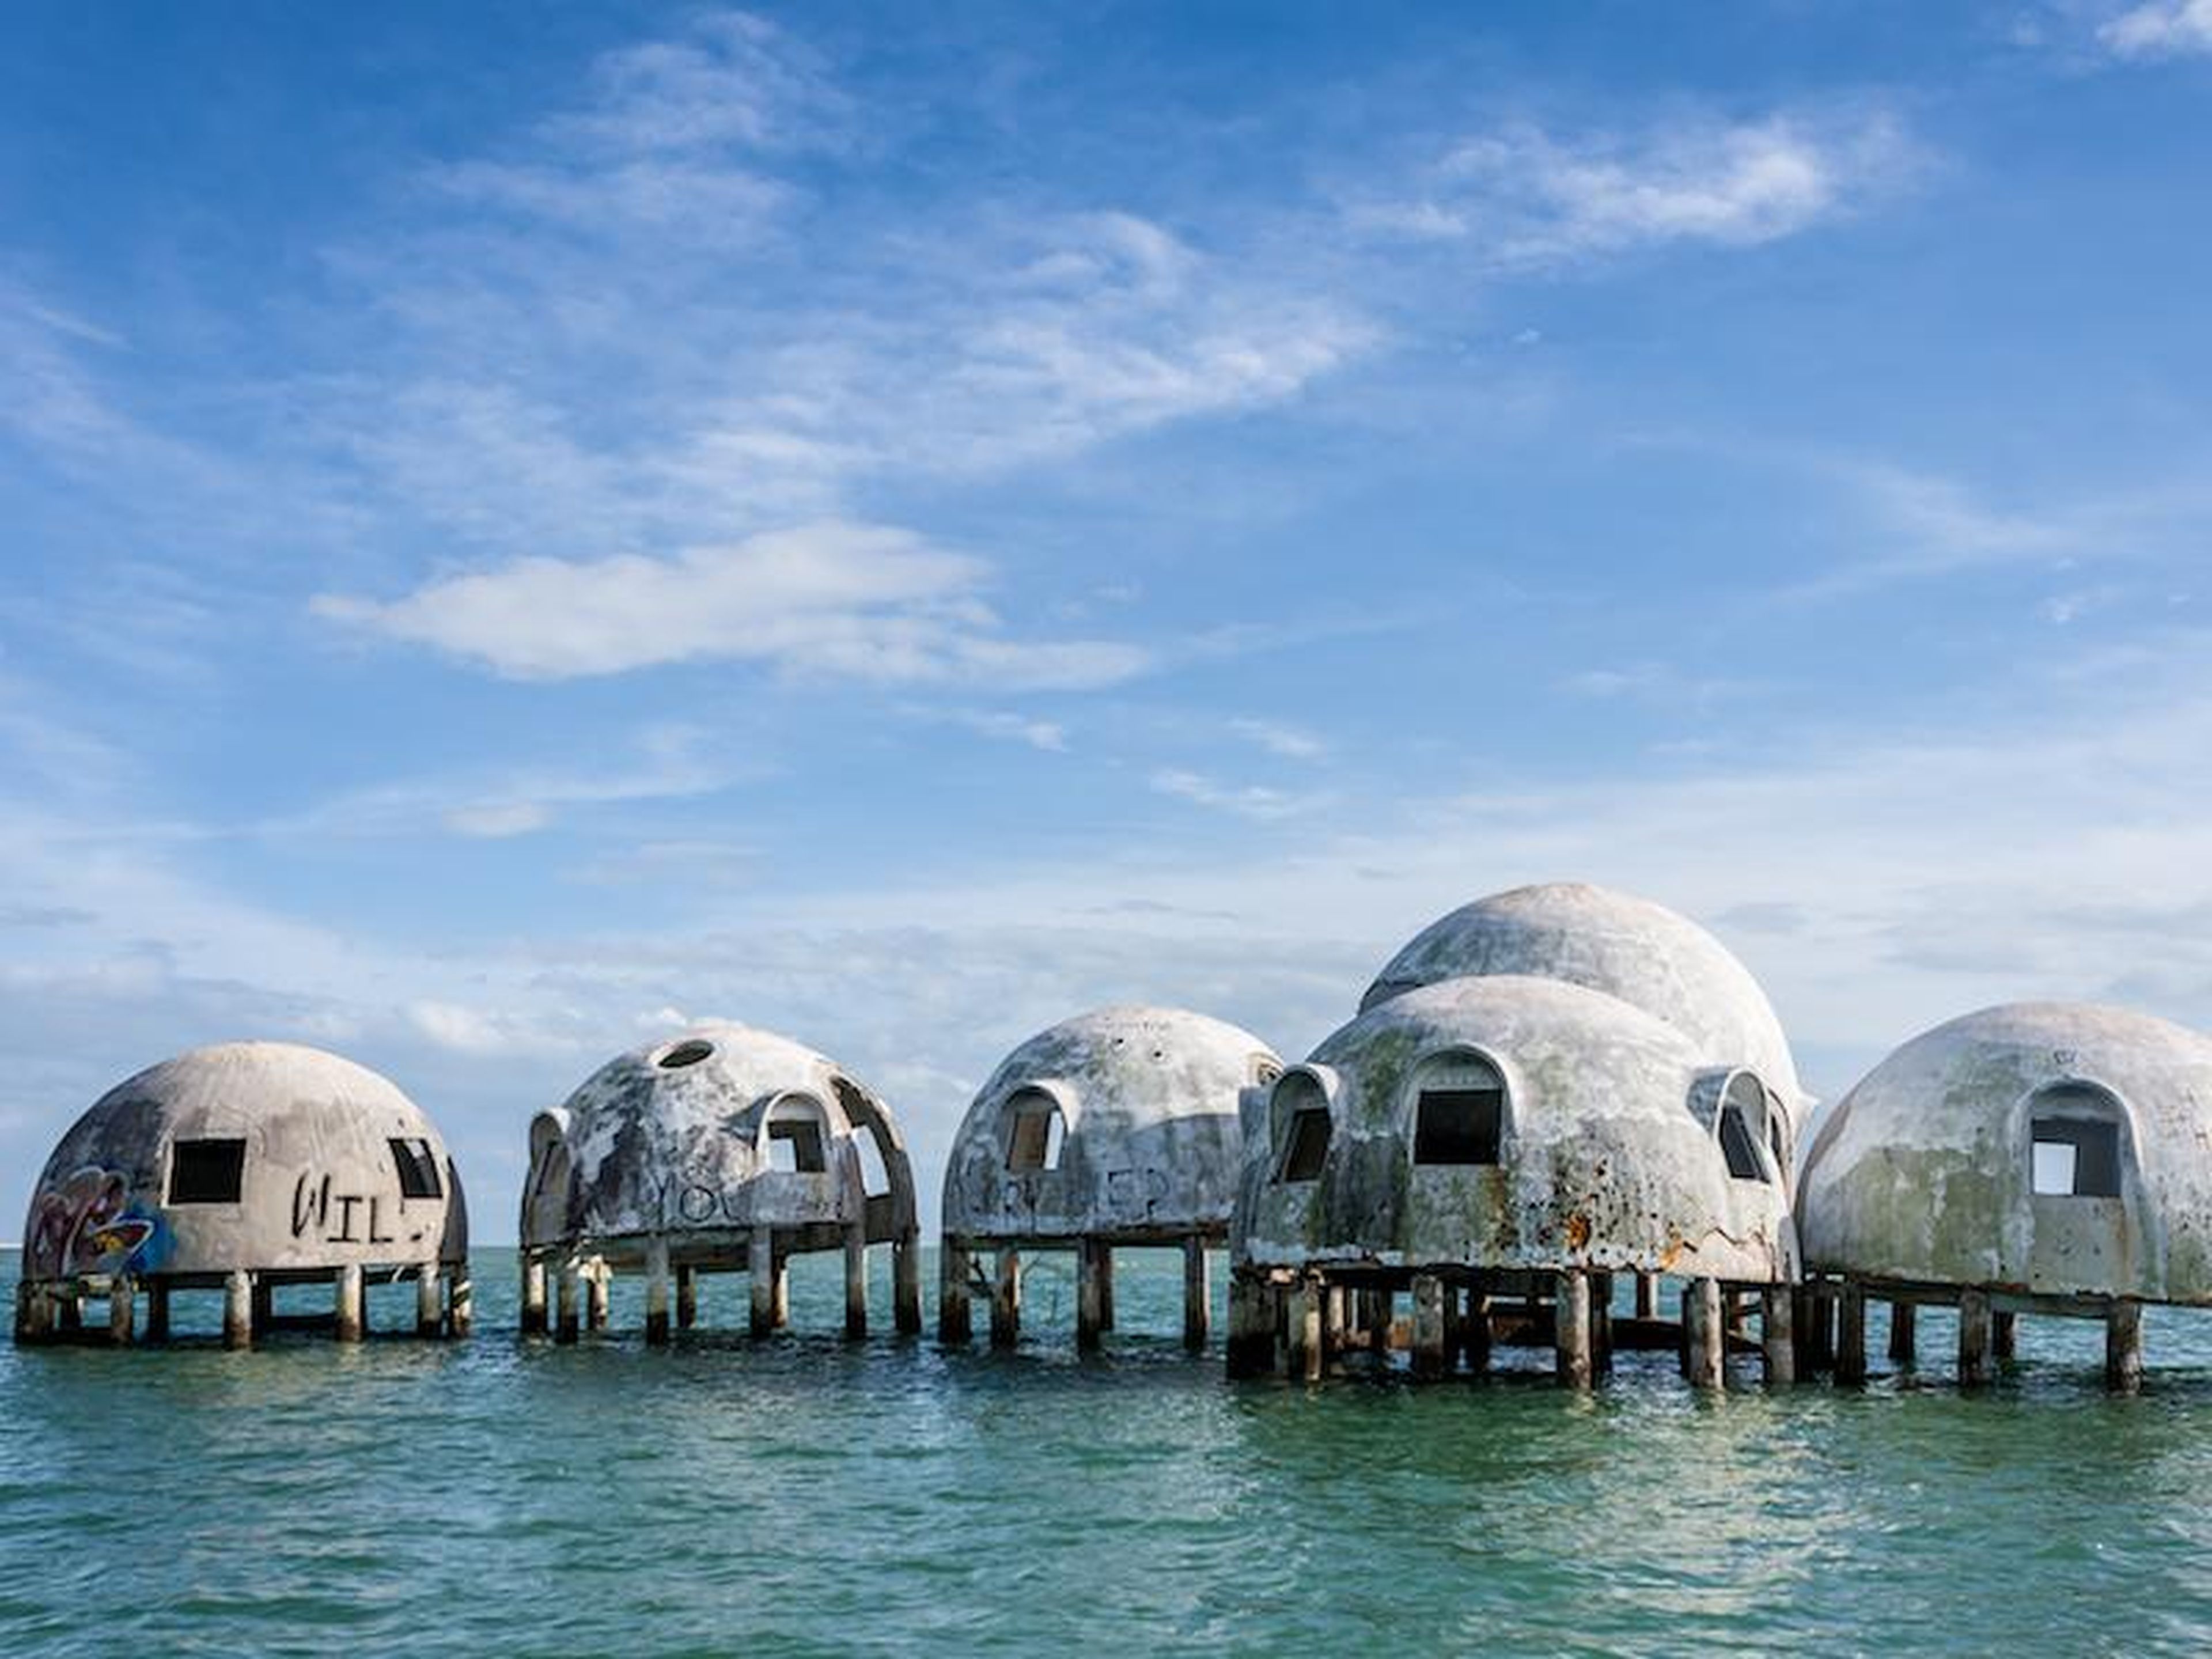 This collection of dome-shaped homes now sits offshore.